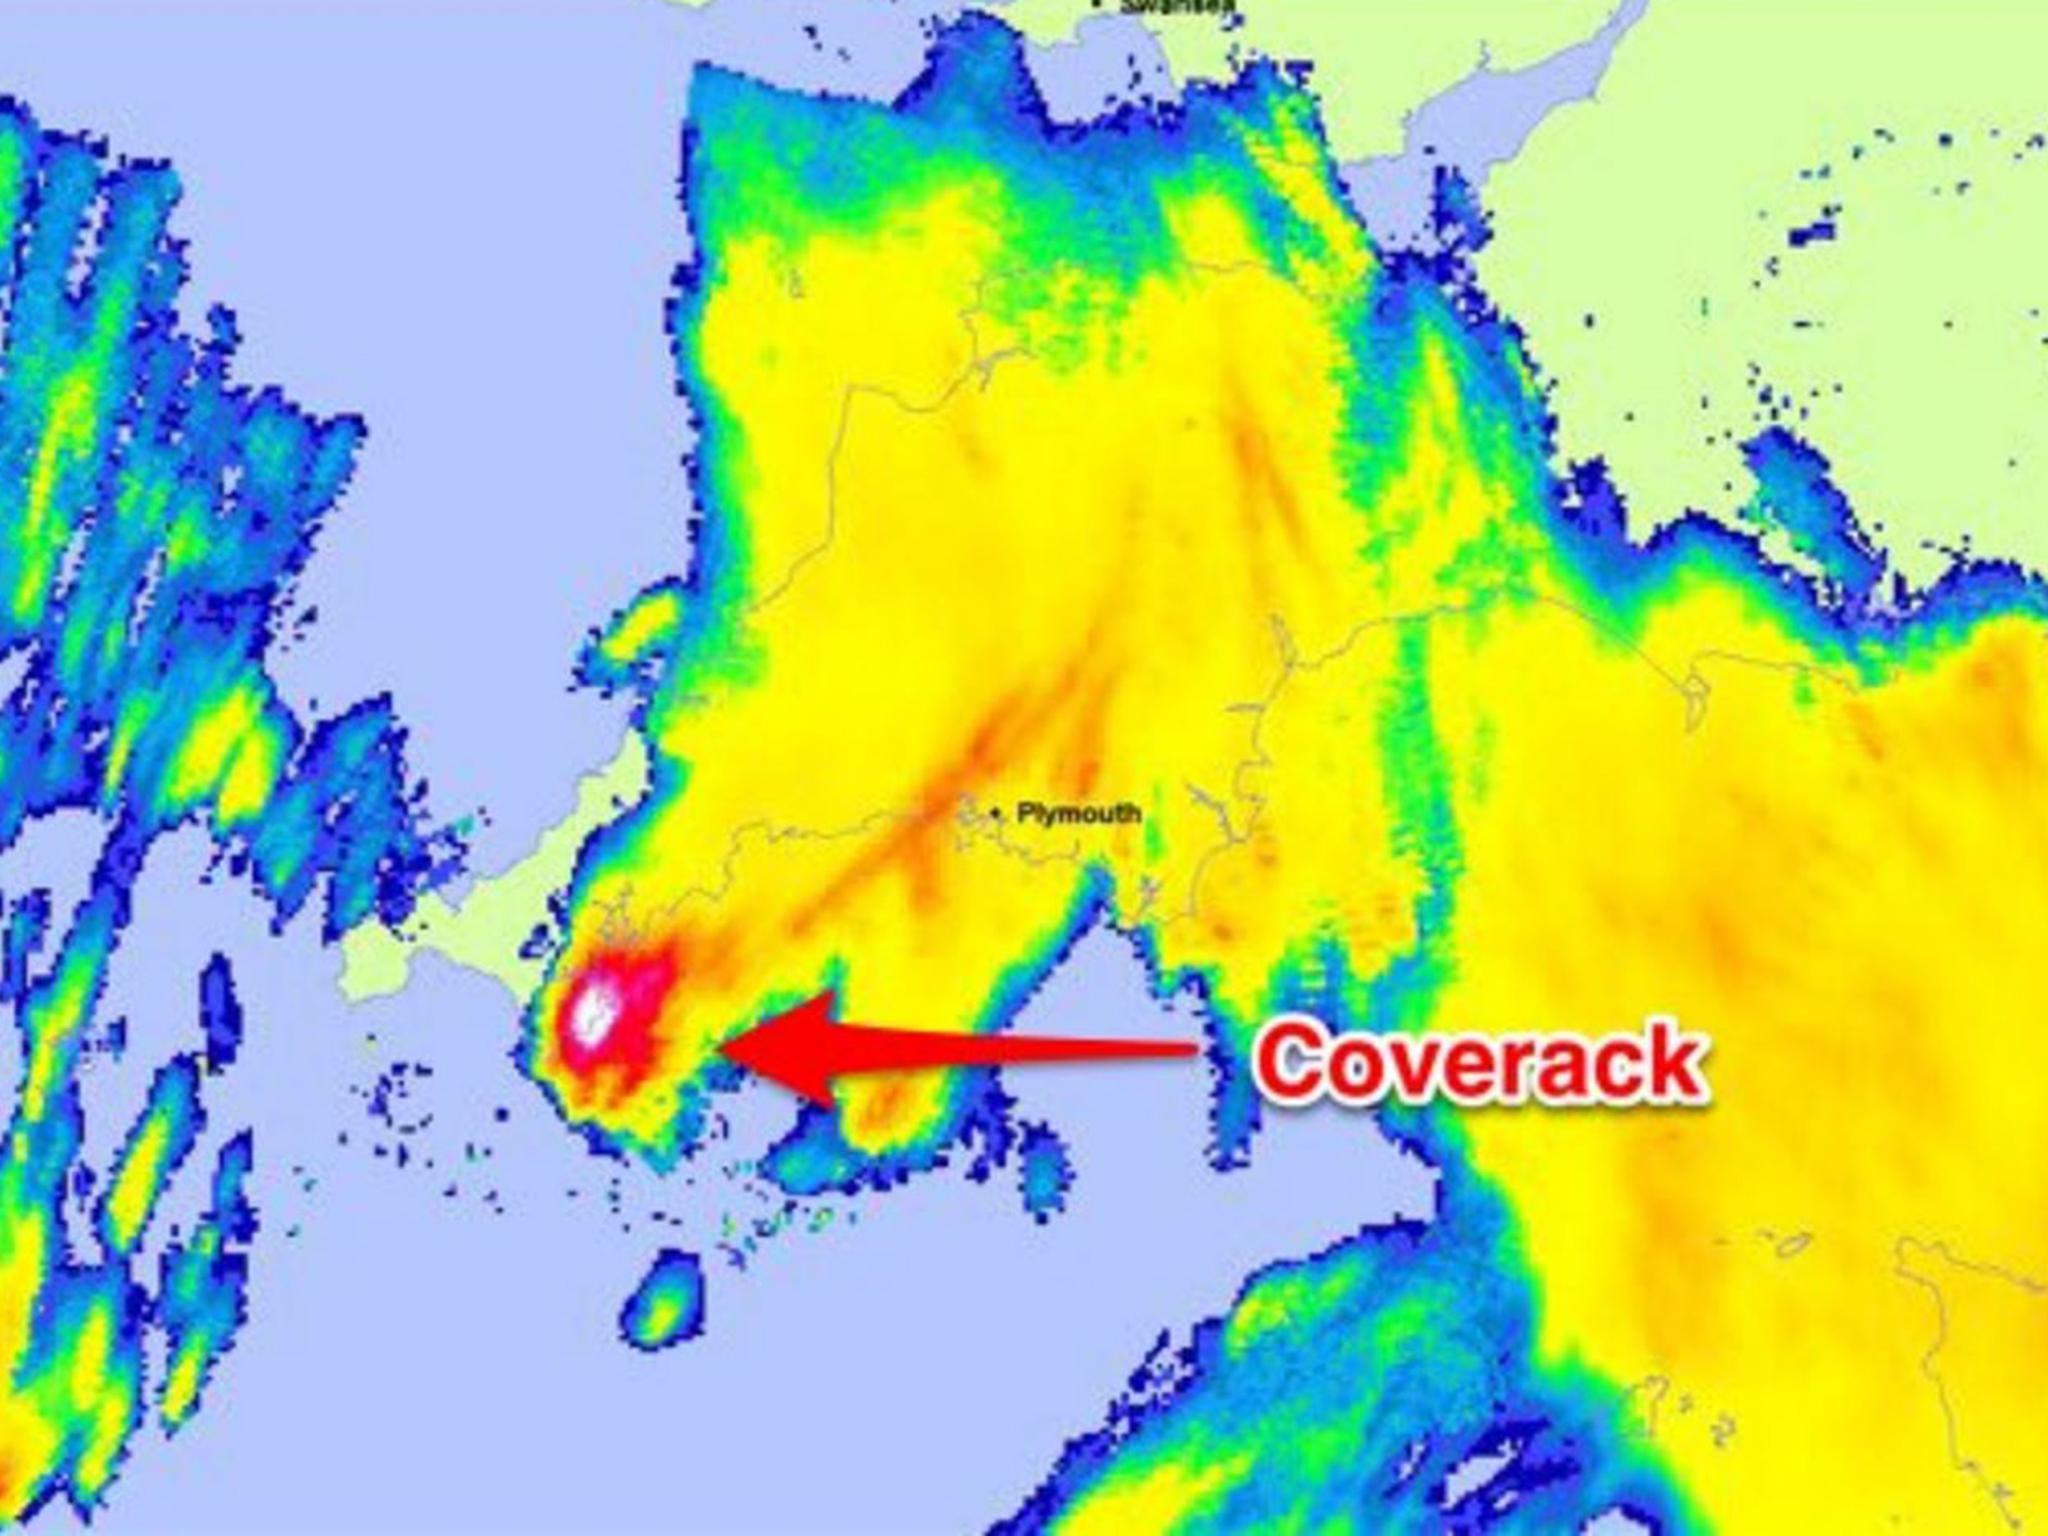 Weather radar image showing rainfall at Coverack, Cornwall